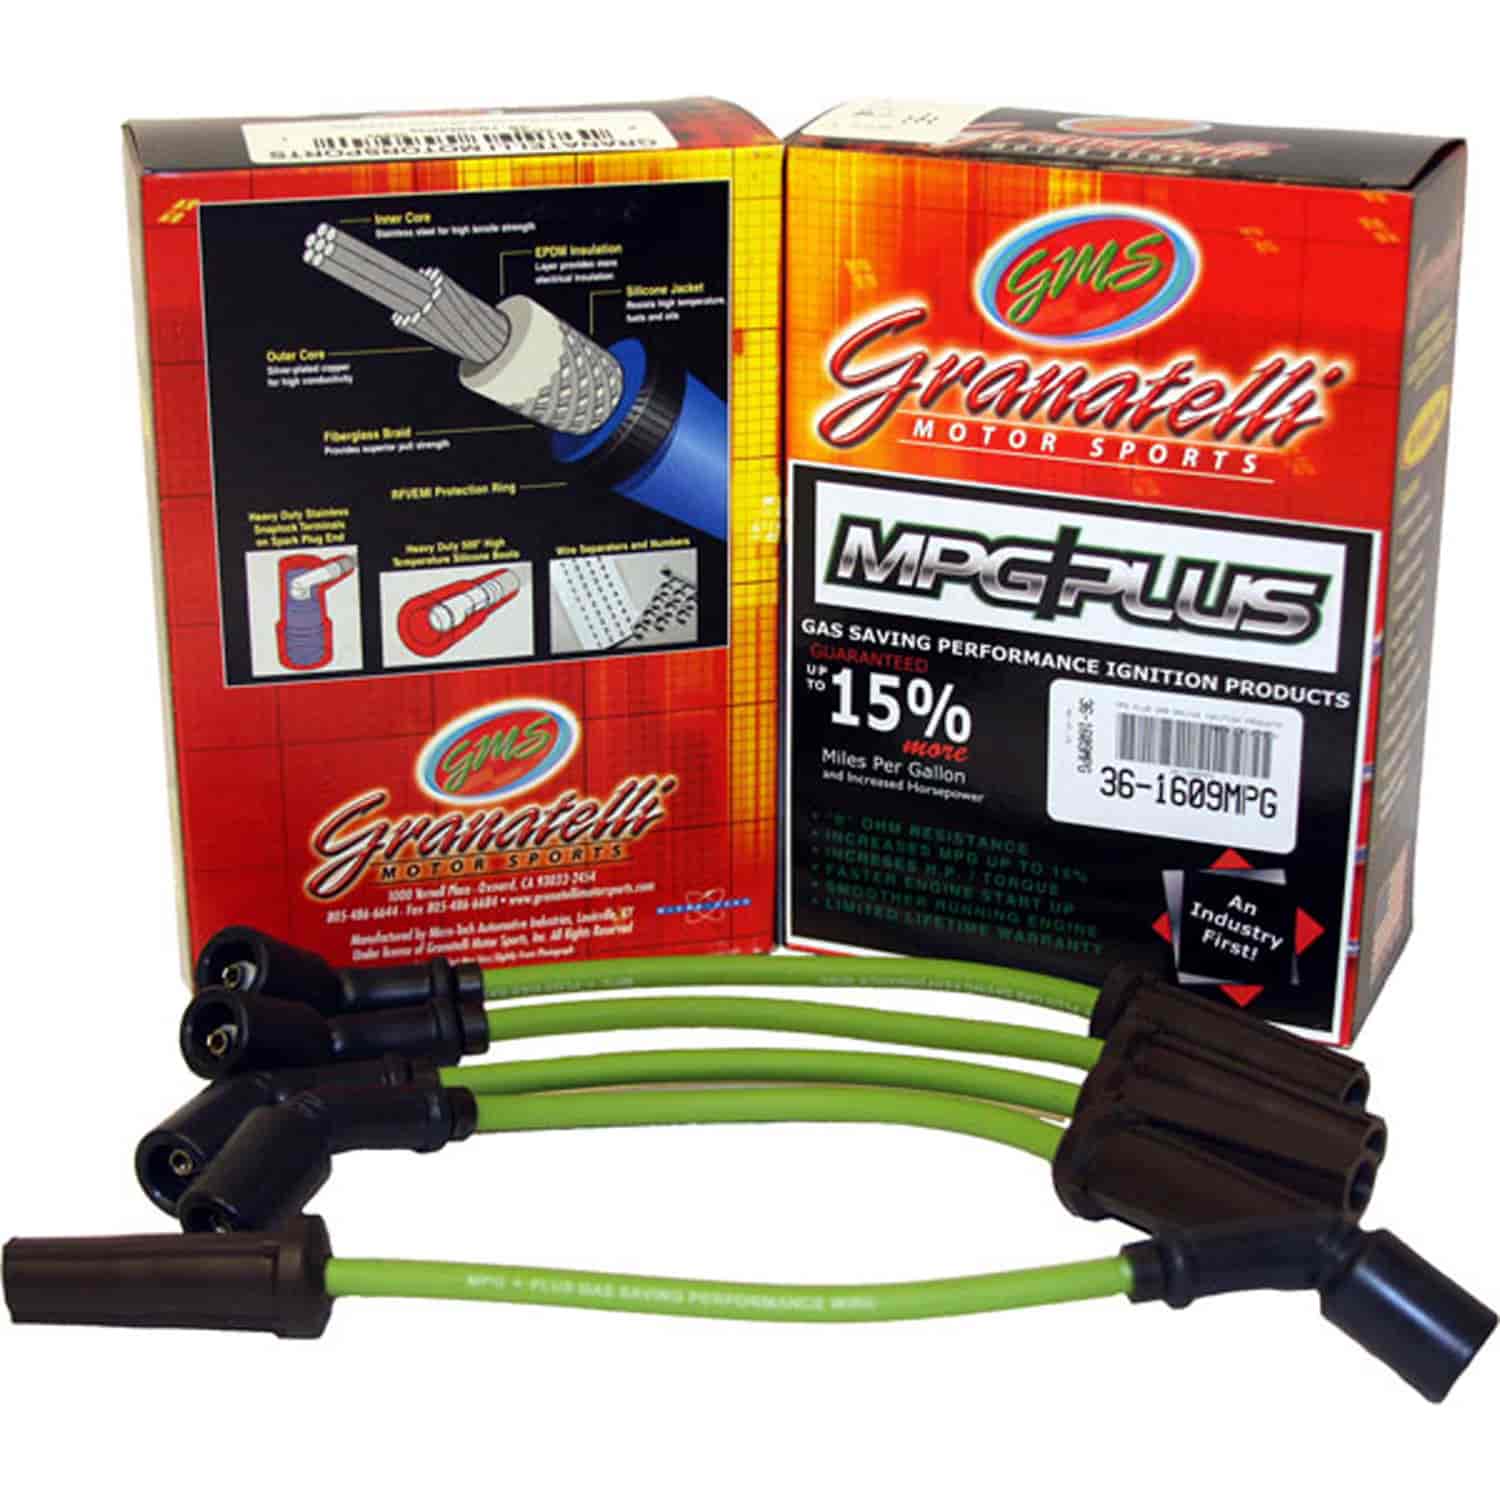 MPG Wires HYUNDAI ACCENT 4CYL 1.5L 95-96